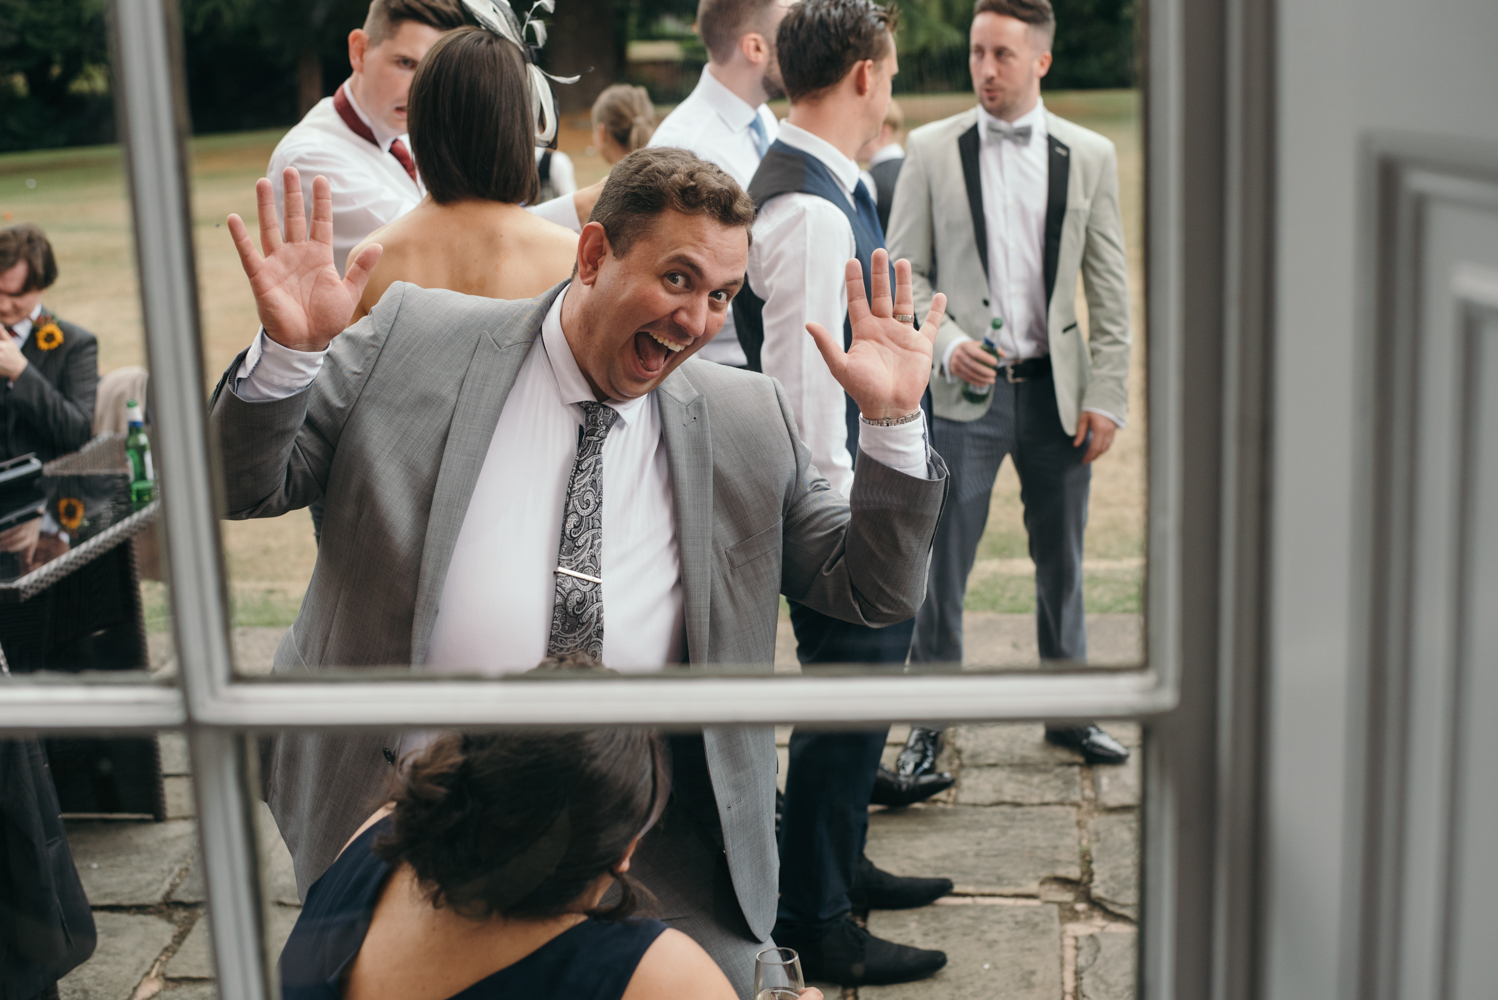 A male guest pulling a funny face during the drinks reception